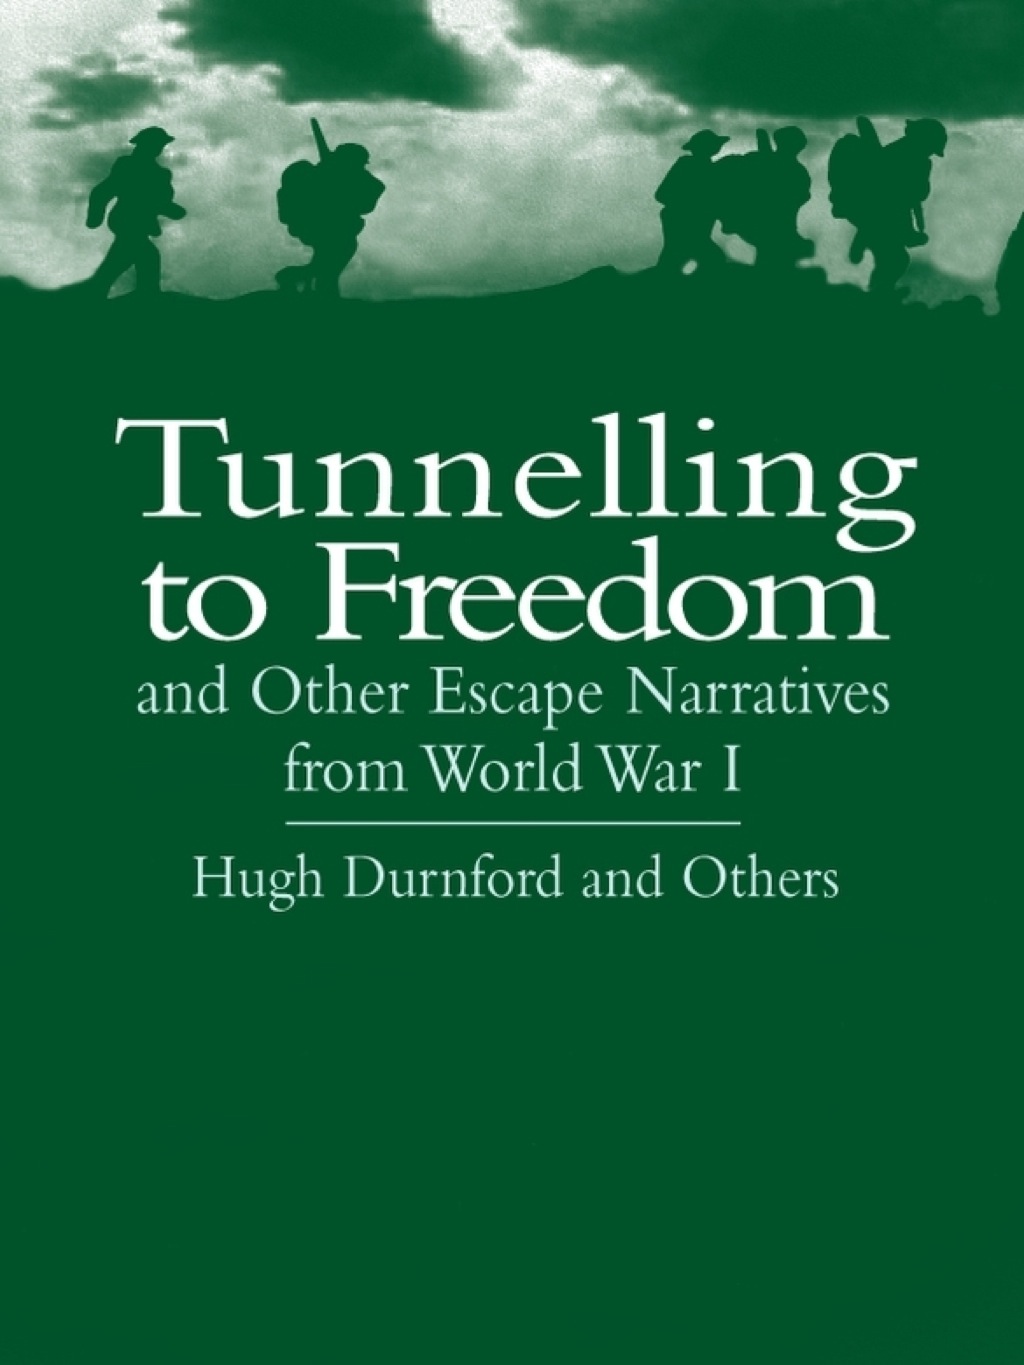 Tunnelling to Freedom and Other Escape Narratives from World War I (eBook) - Hugh Durnford,